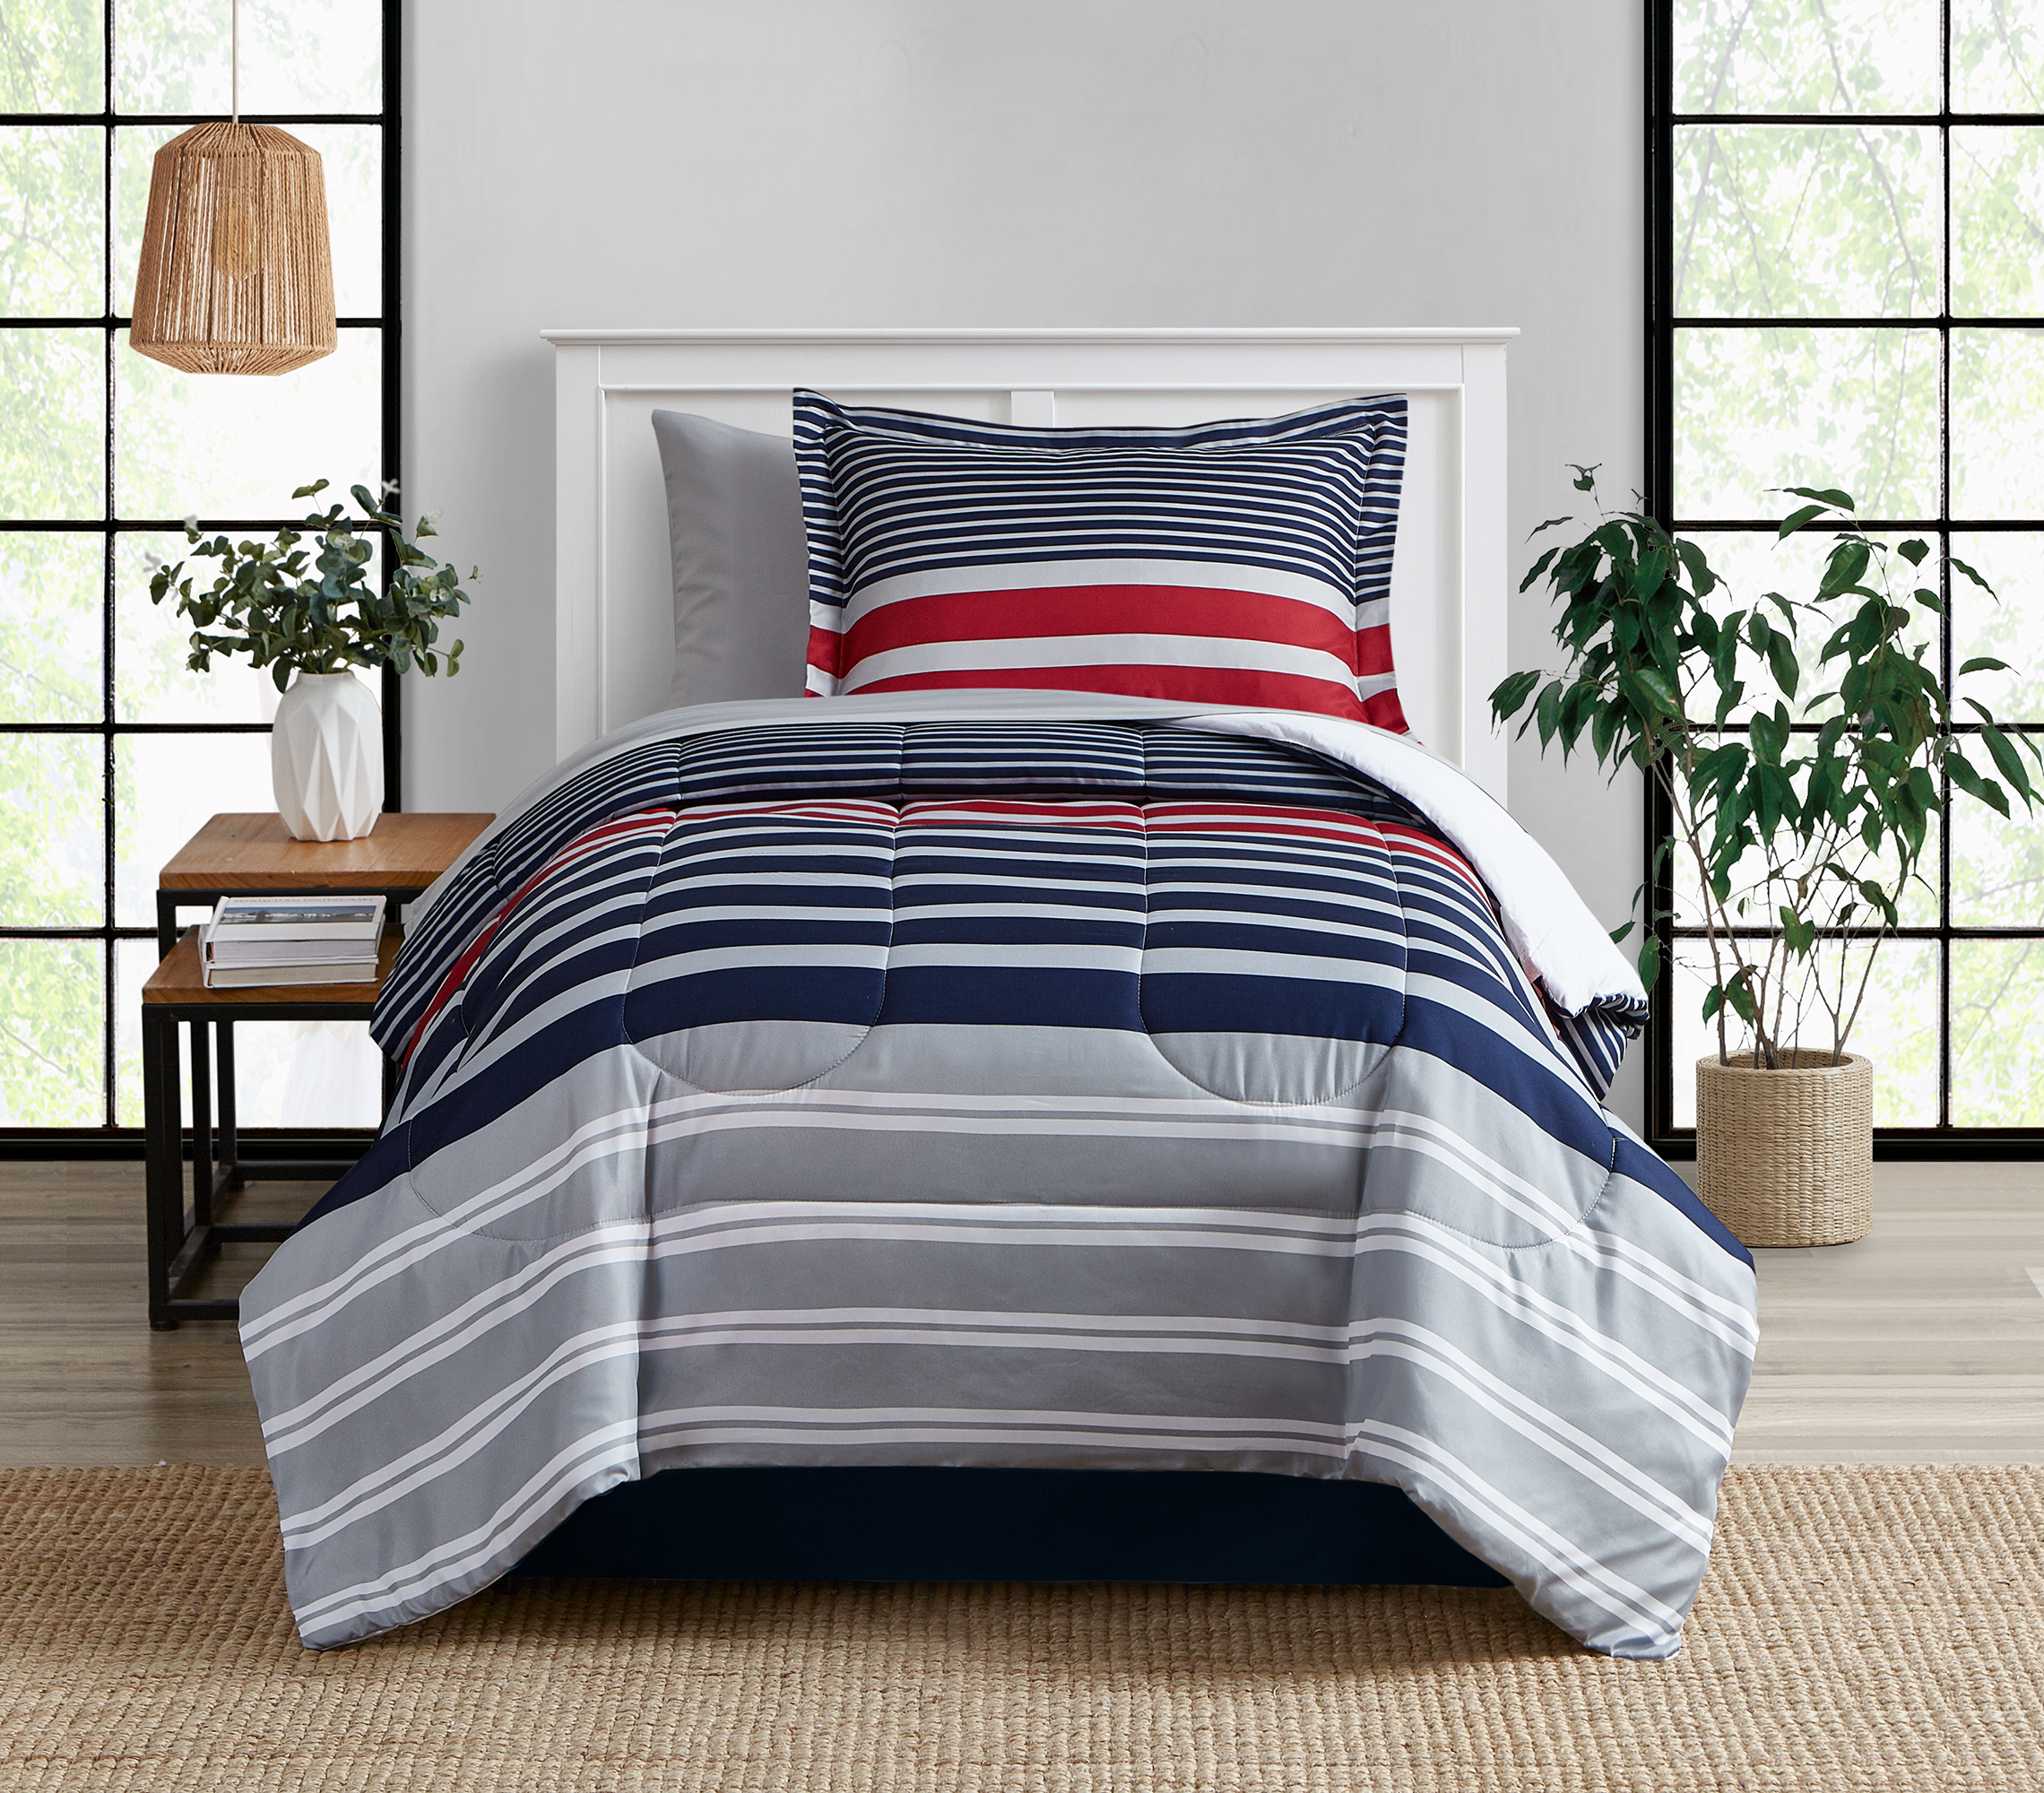 Mainstays Red and Blue Stripe 6 Piece Bed in a Bag Comforter Set with Sheets, Twin - image 1 of 9